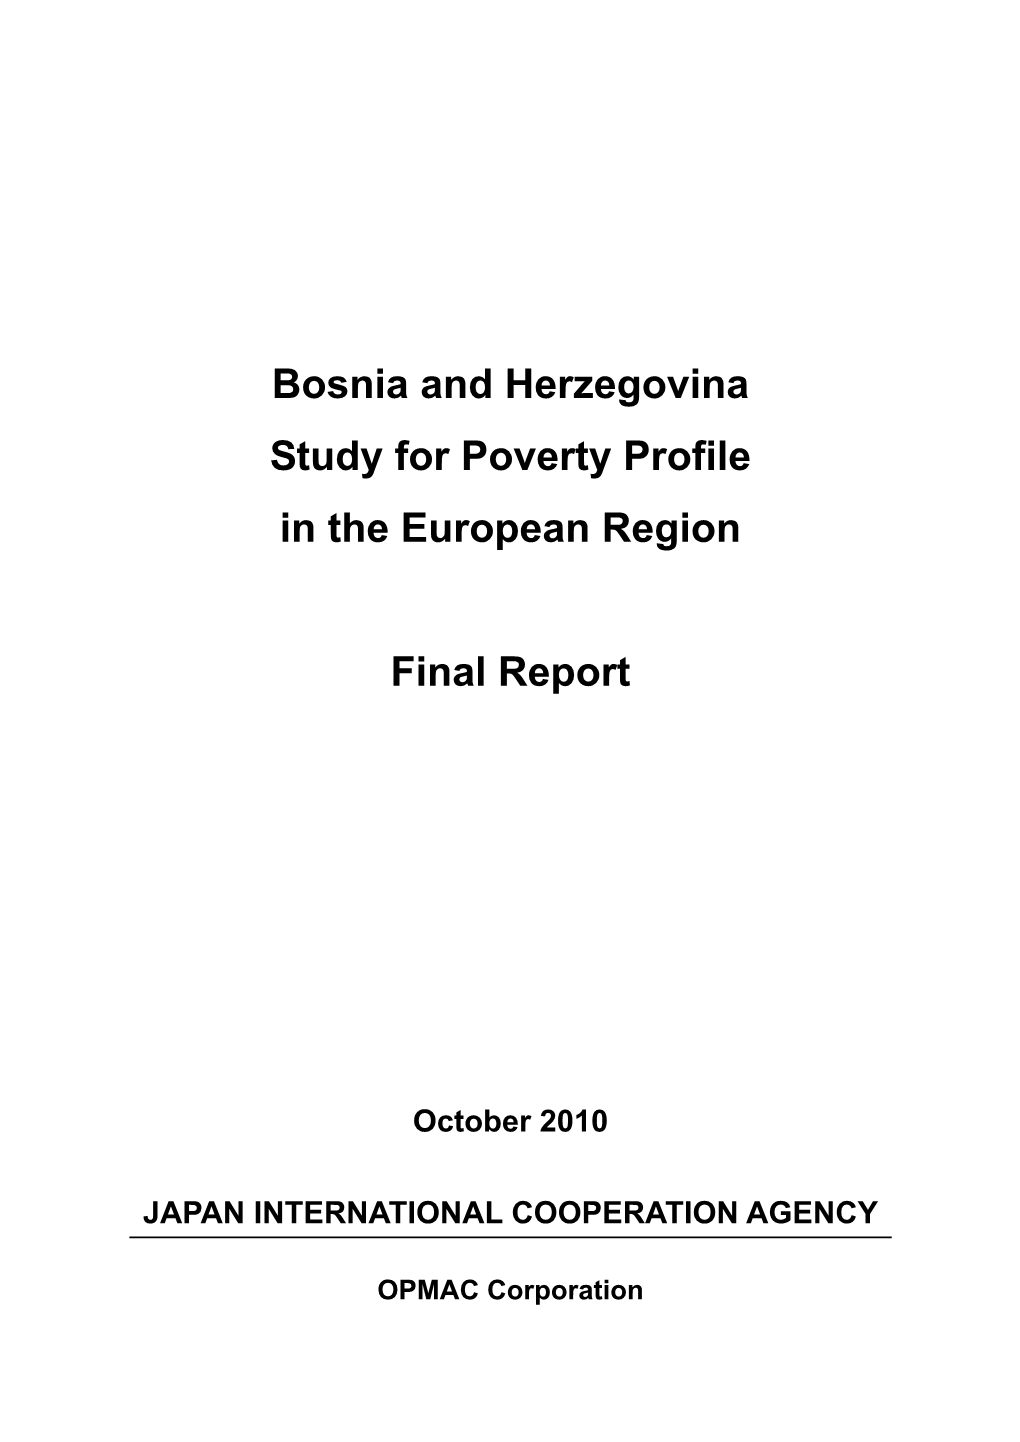 Bosnia and Herzegovina Study for Poverty Profile in the European Region